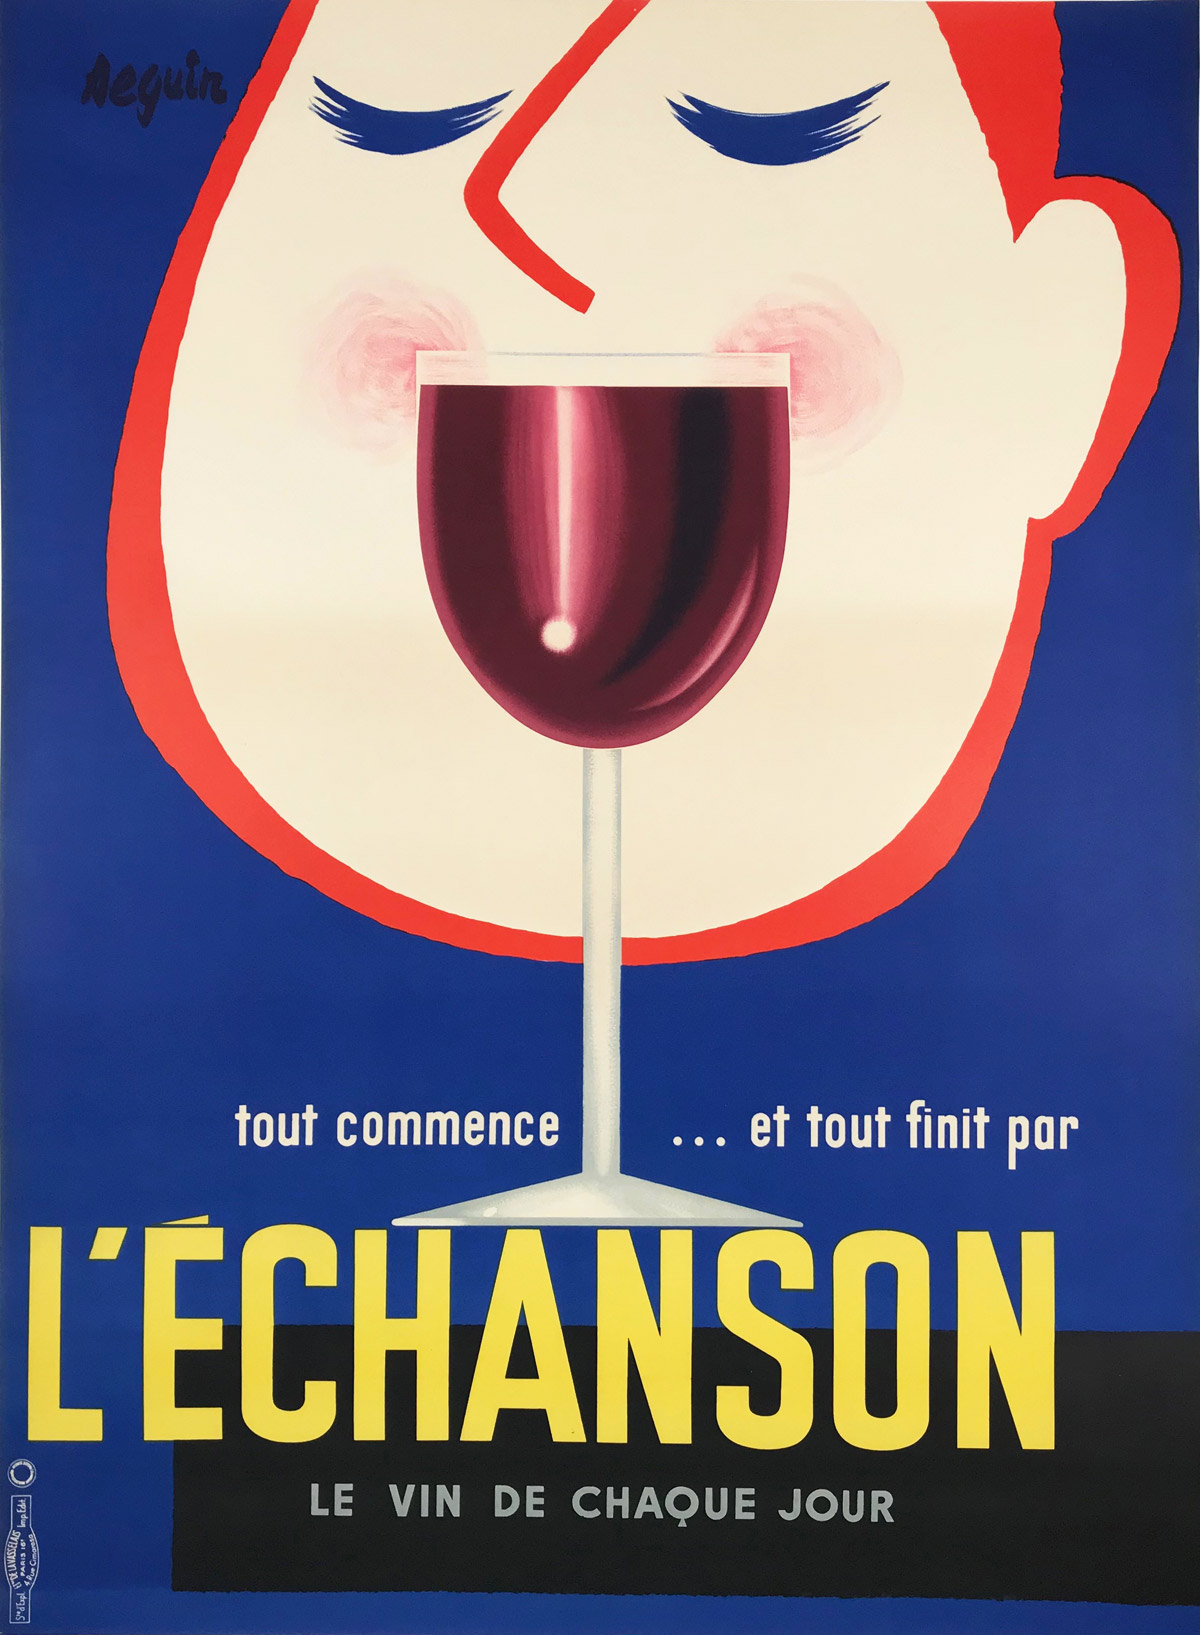 L Echanson by Seguin Original 1955 Vintage French Wine Advertisement Lithograph Poster Linen Backed. French poster features a cartoon face with his eyes closed behind a glass of red wine against a blue background. Original Antique Posters.